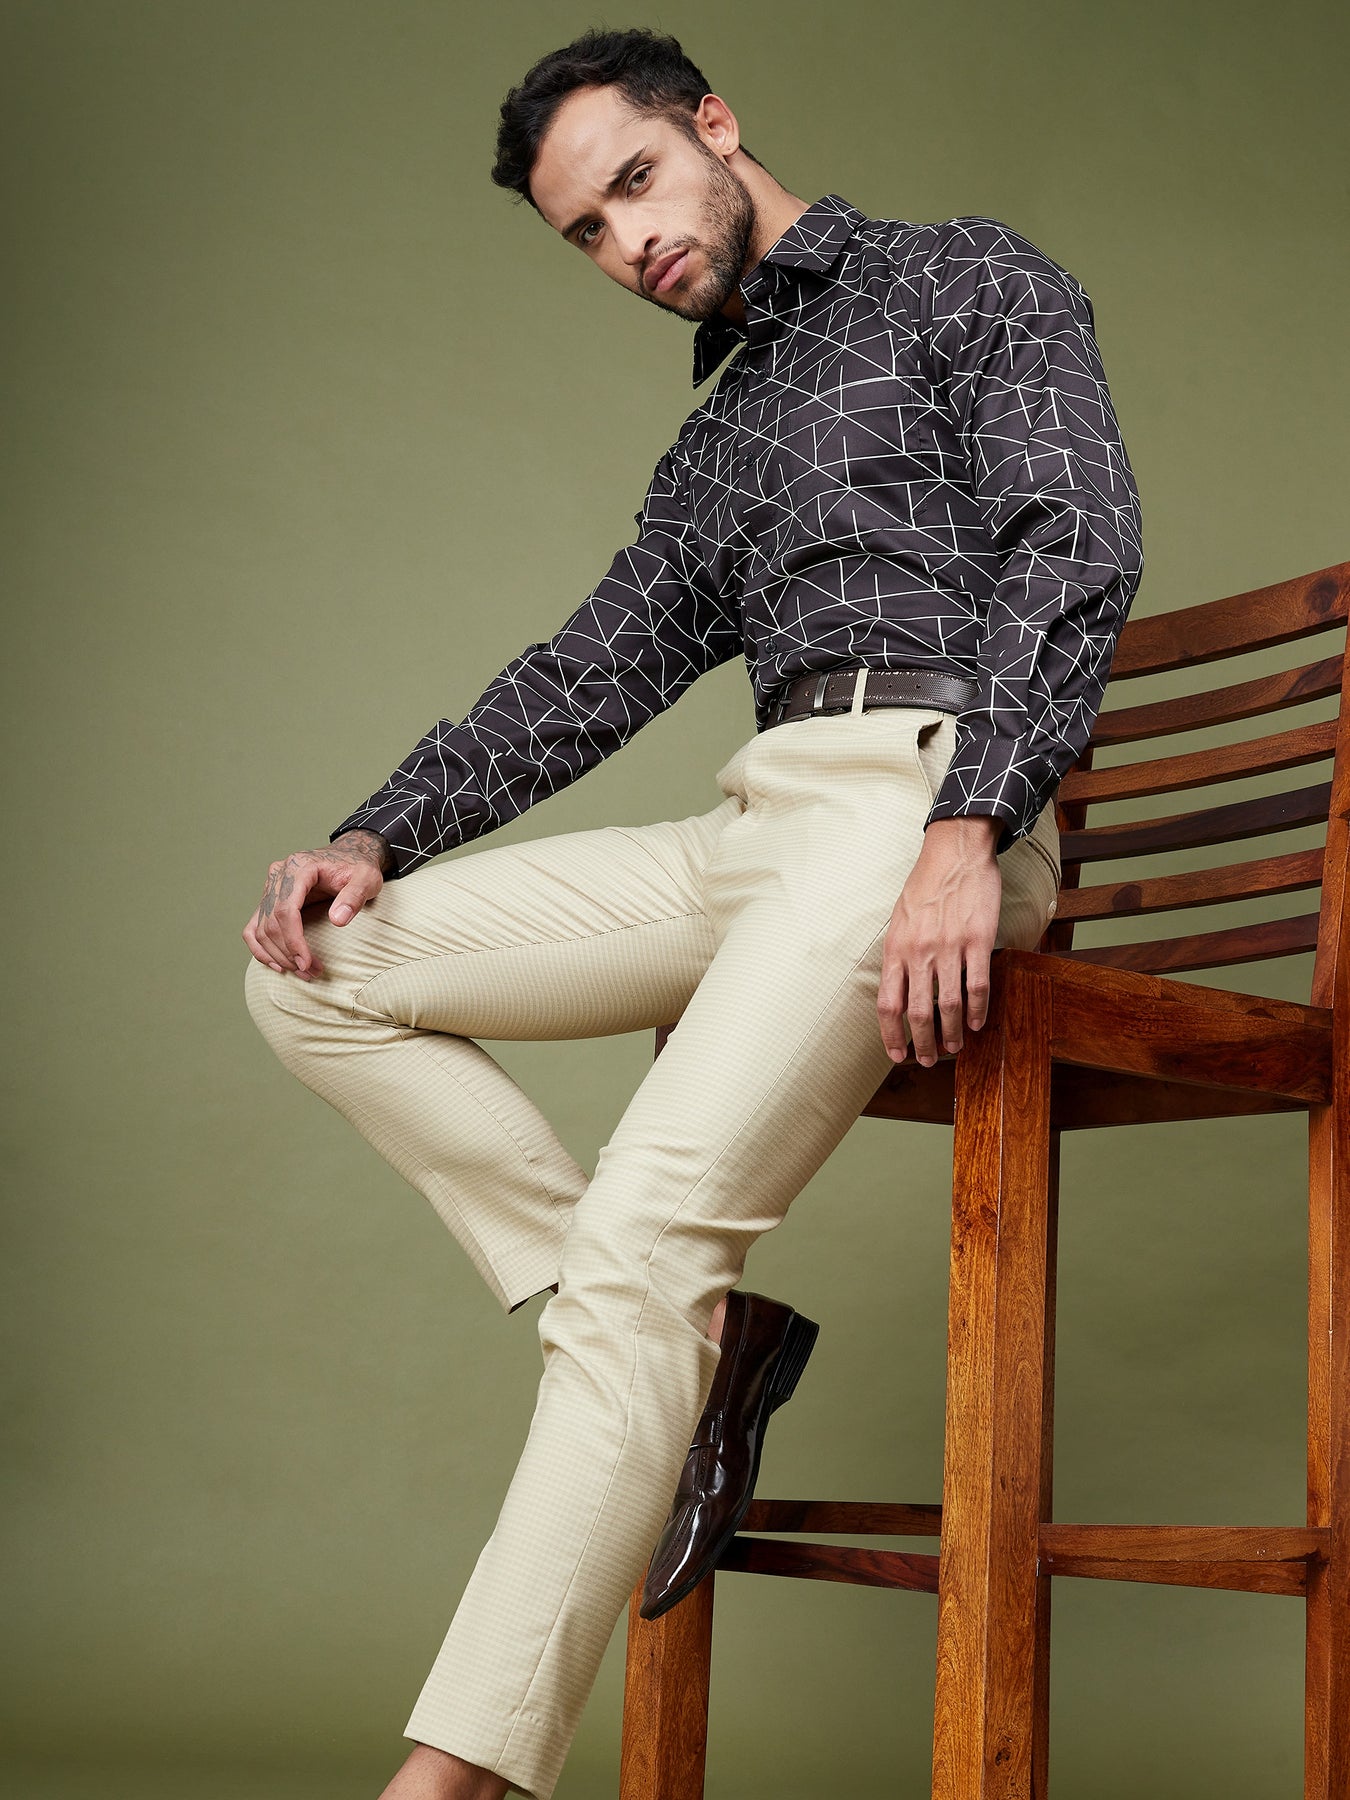 Buy LaMODE Men Cream Coloured Comfort Regular Fit Checked Formal Trousers   Trousers for Men 5531244  Myntra